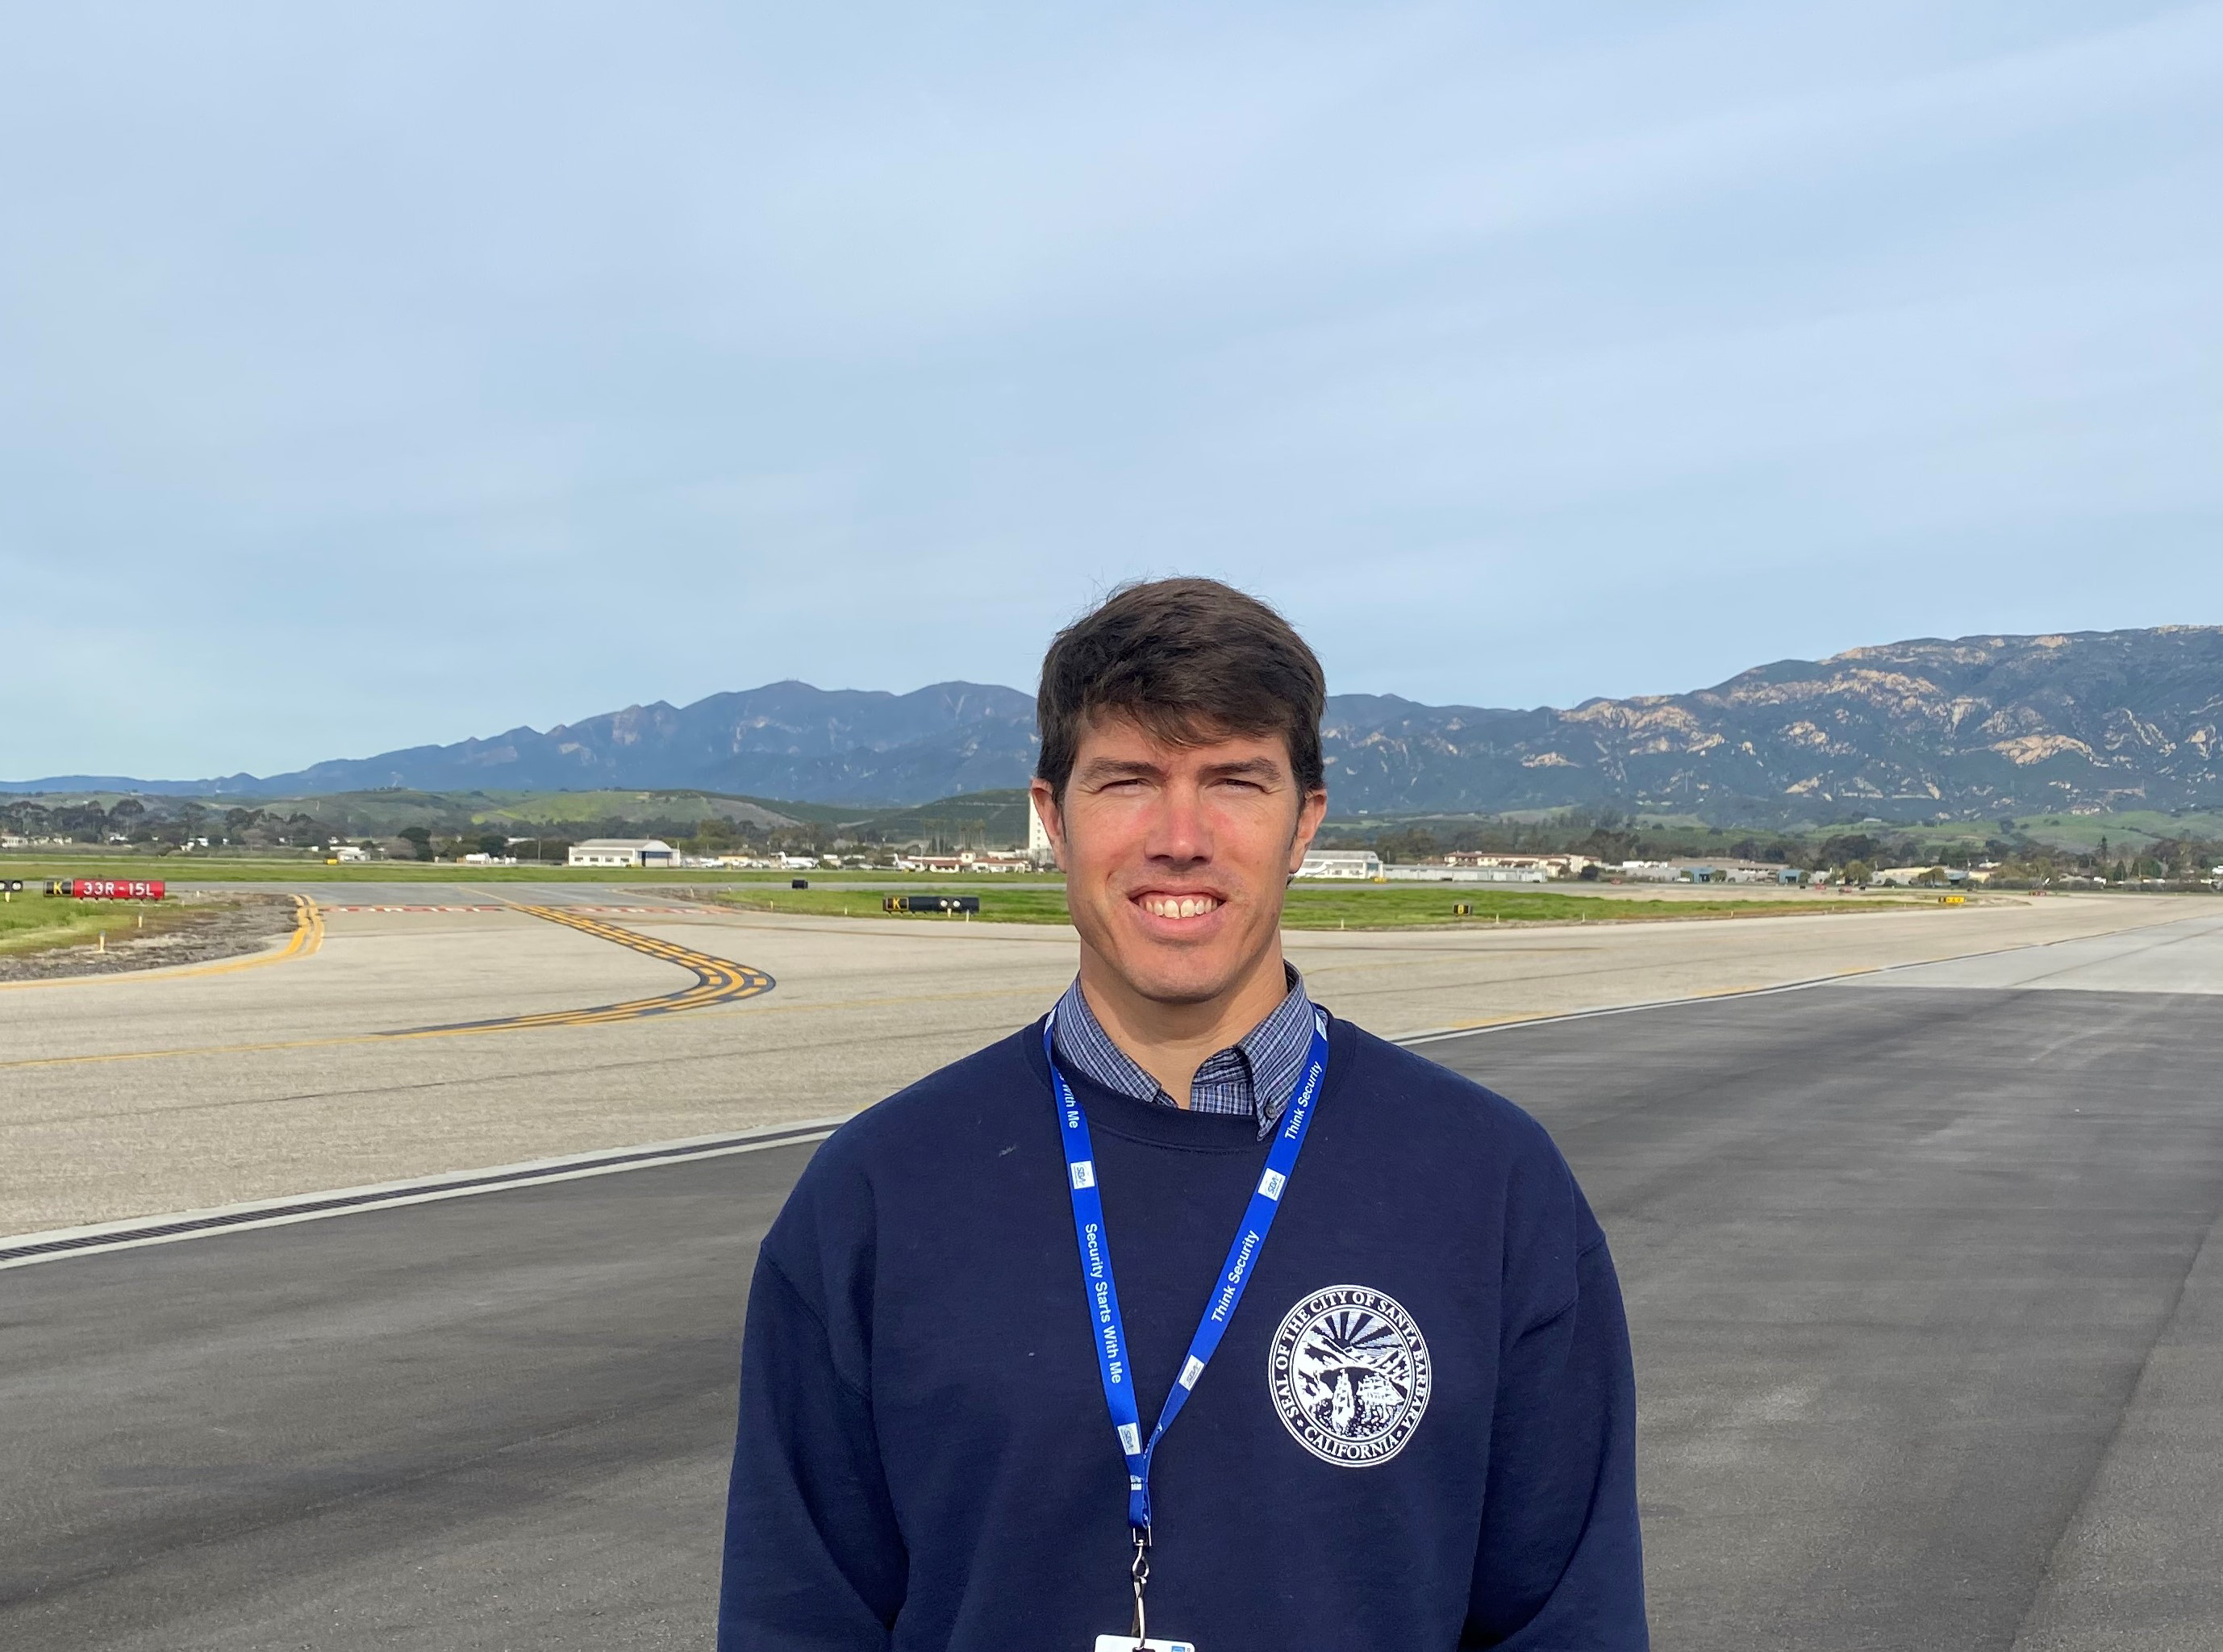 Employee of the Month Brad Klinzing standing on the airfield